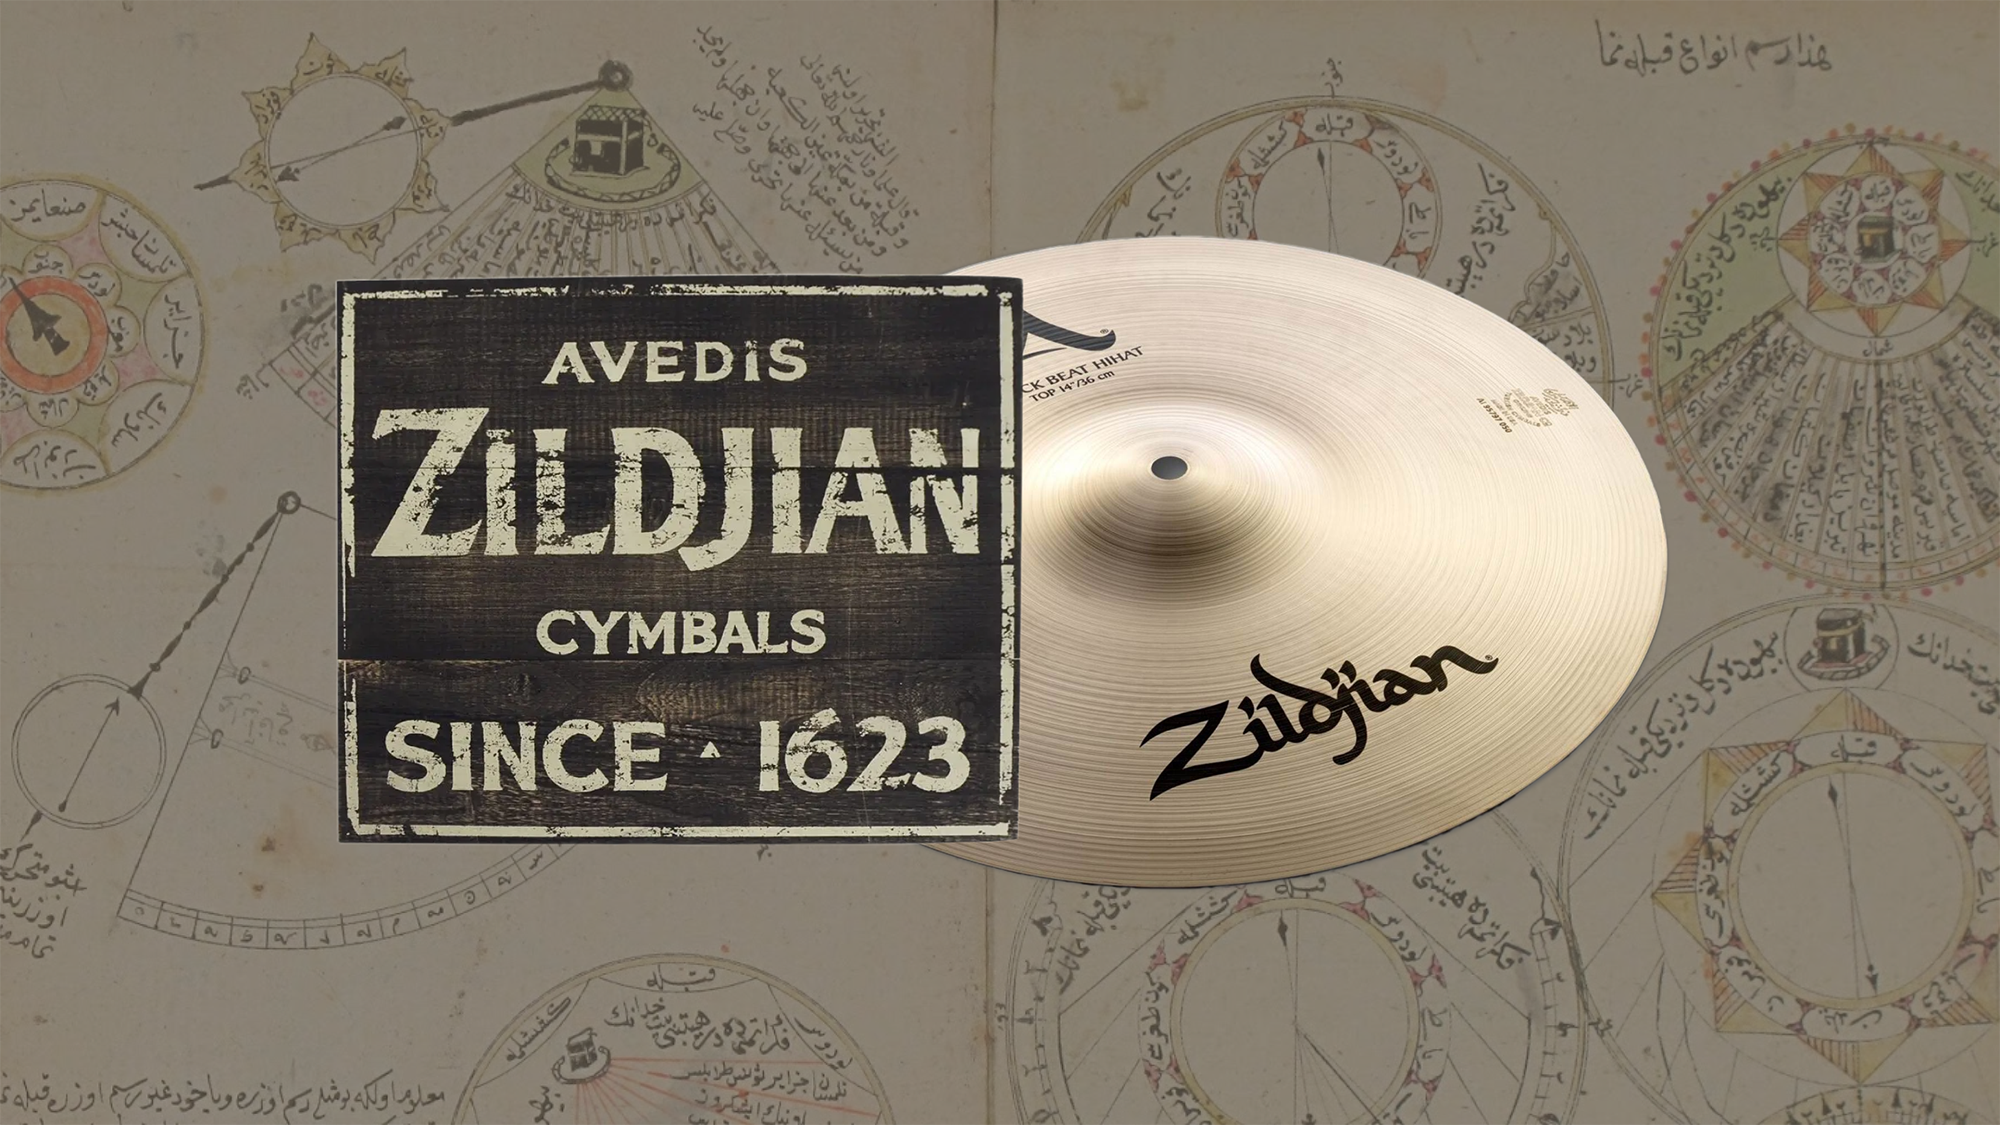 Zildjian Cymbals is a family-run business with a 400-year legacy